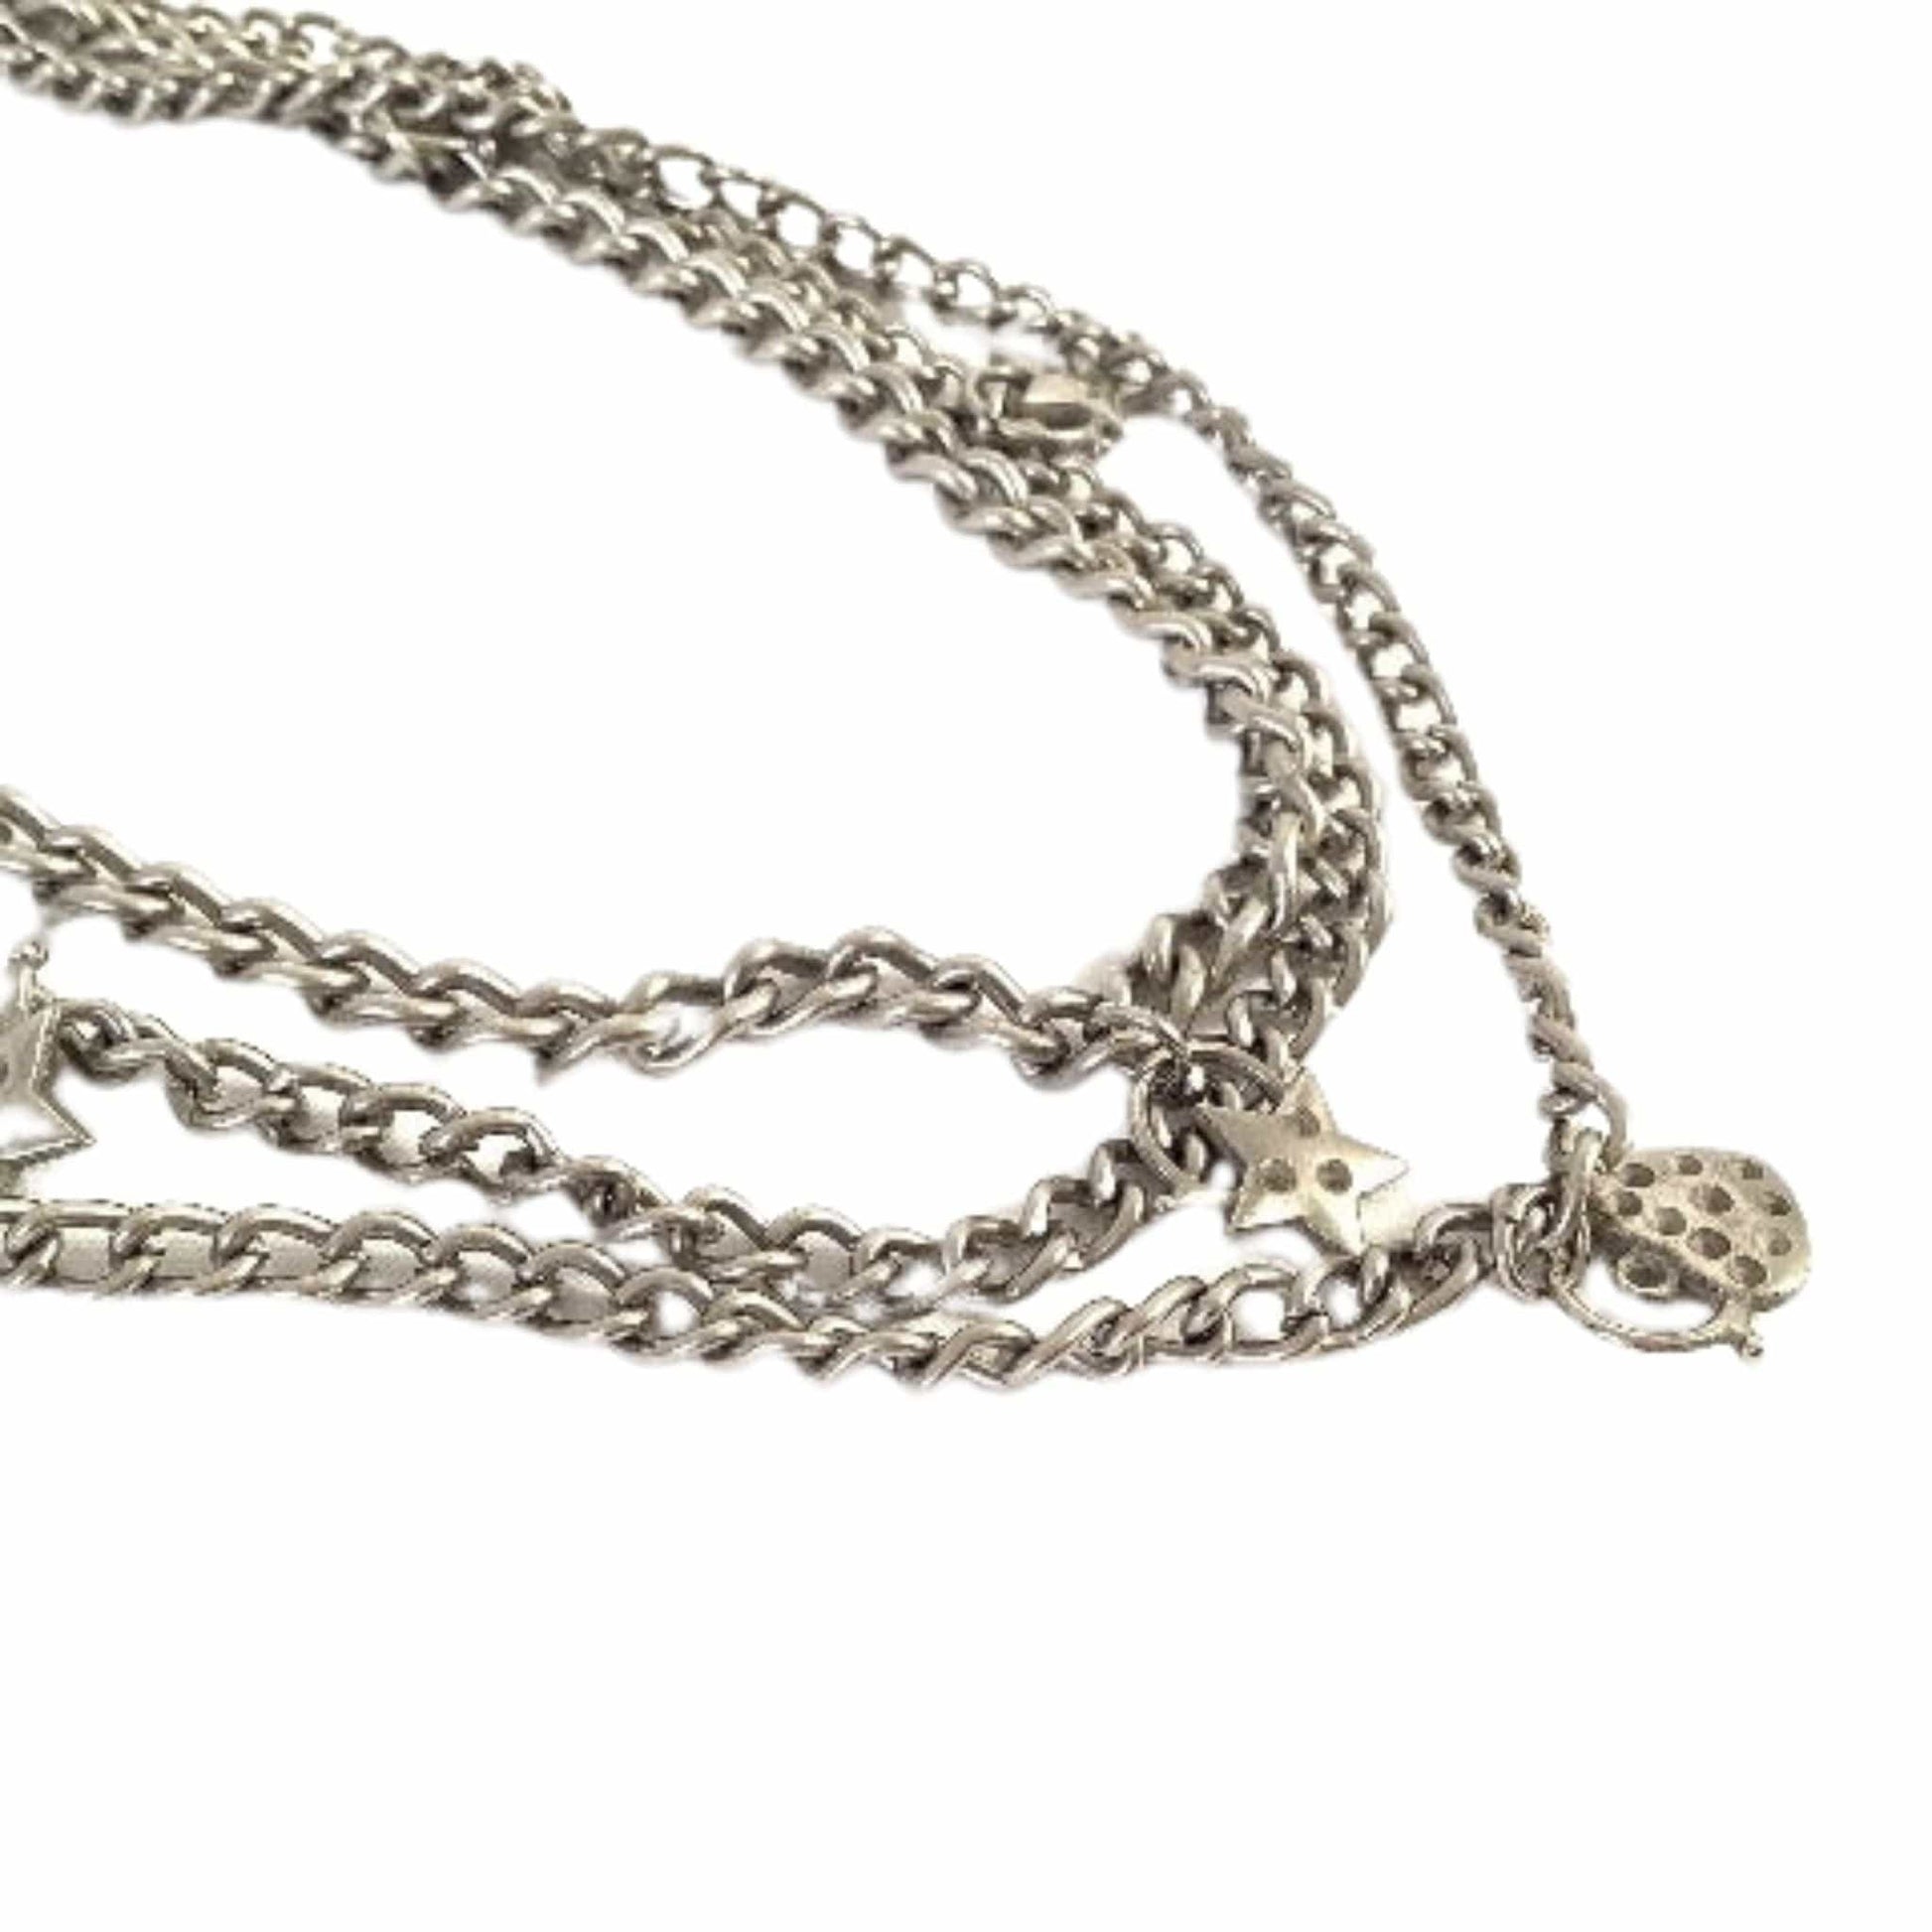 Pants Chain Accessory Pewter / Stainless / Vintage 1980s